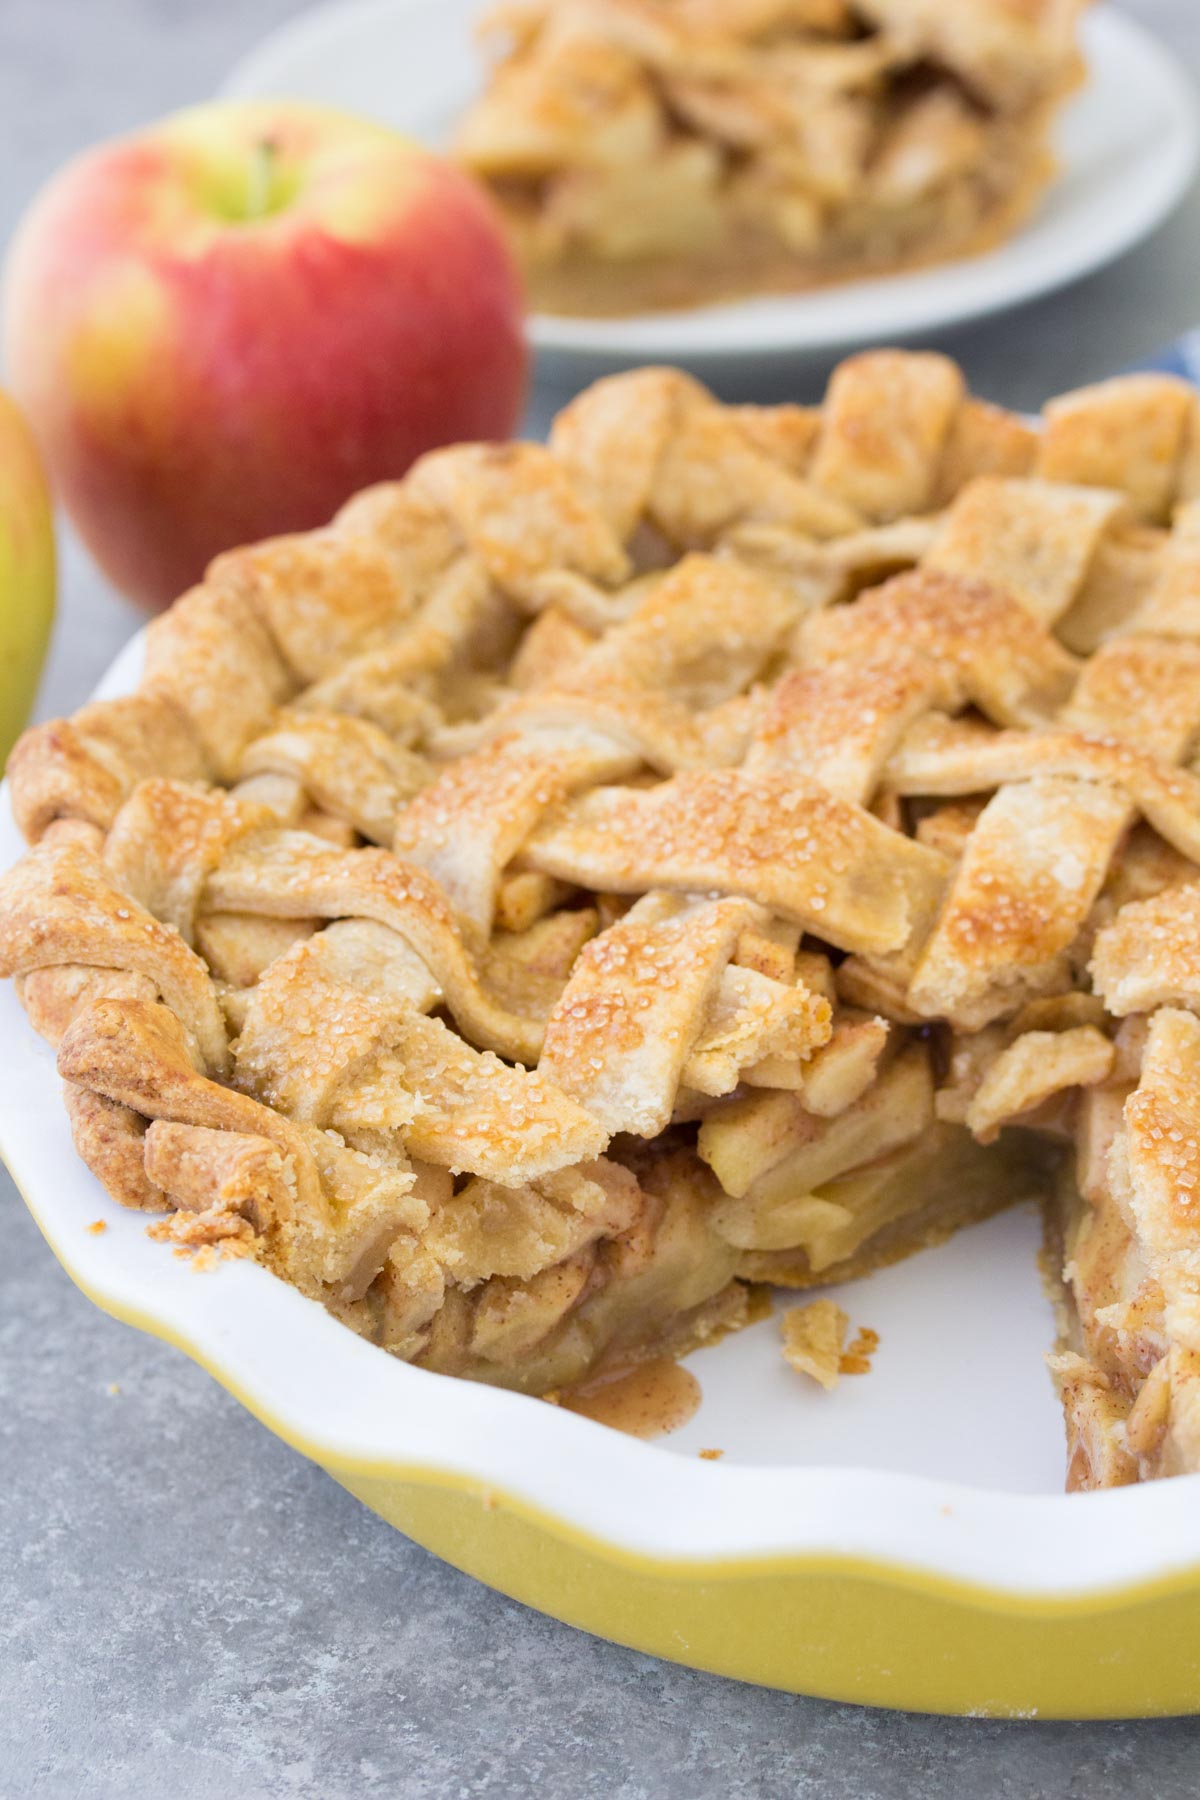 Apple pie with slice cut out.